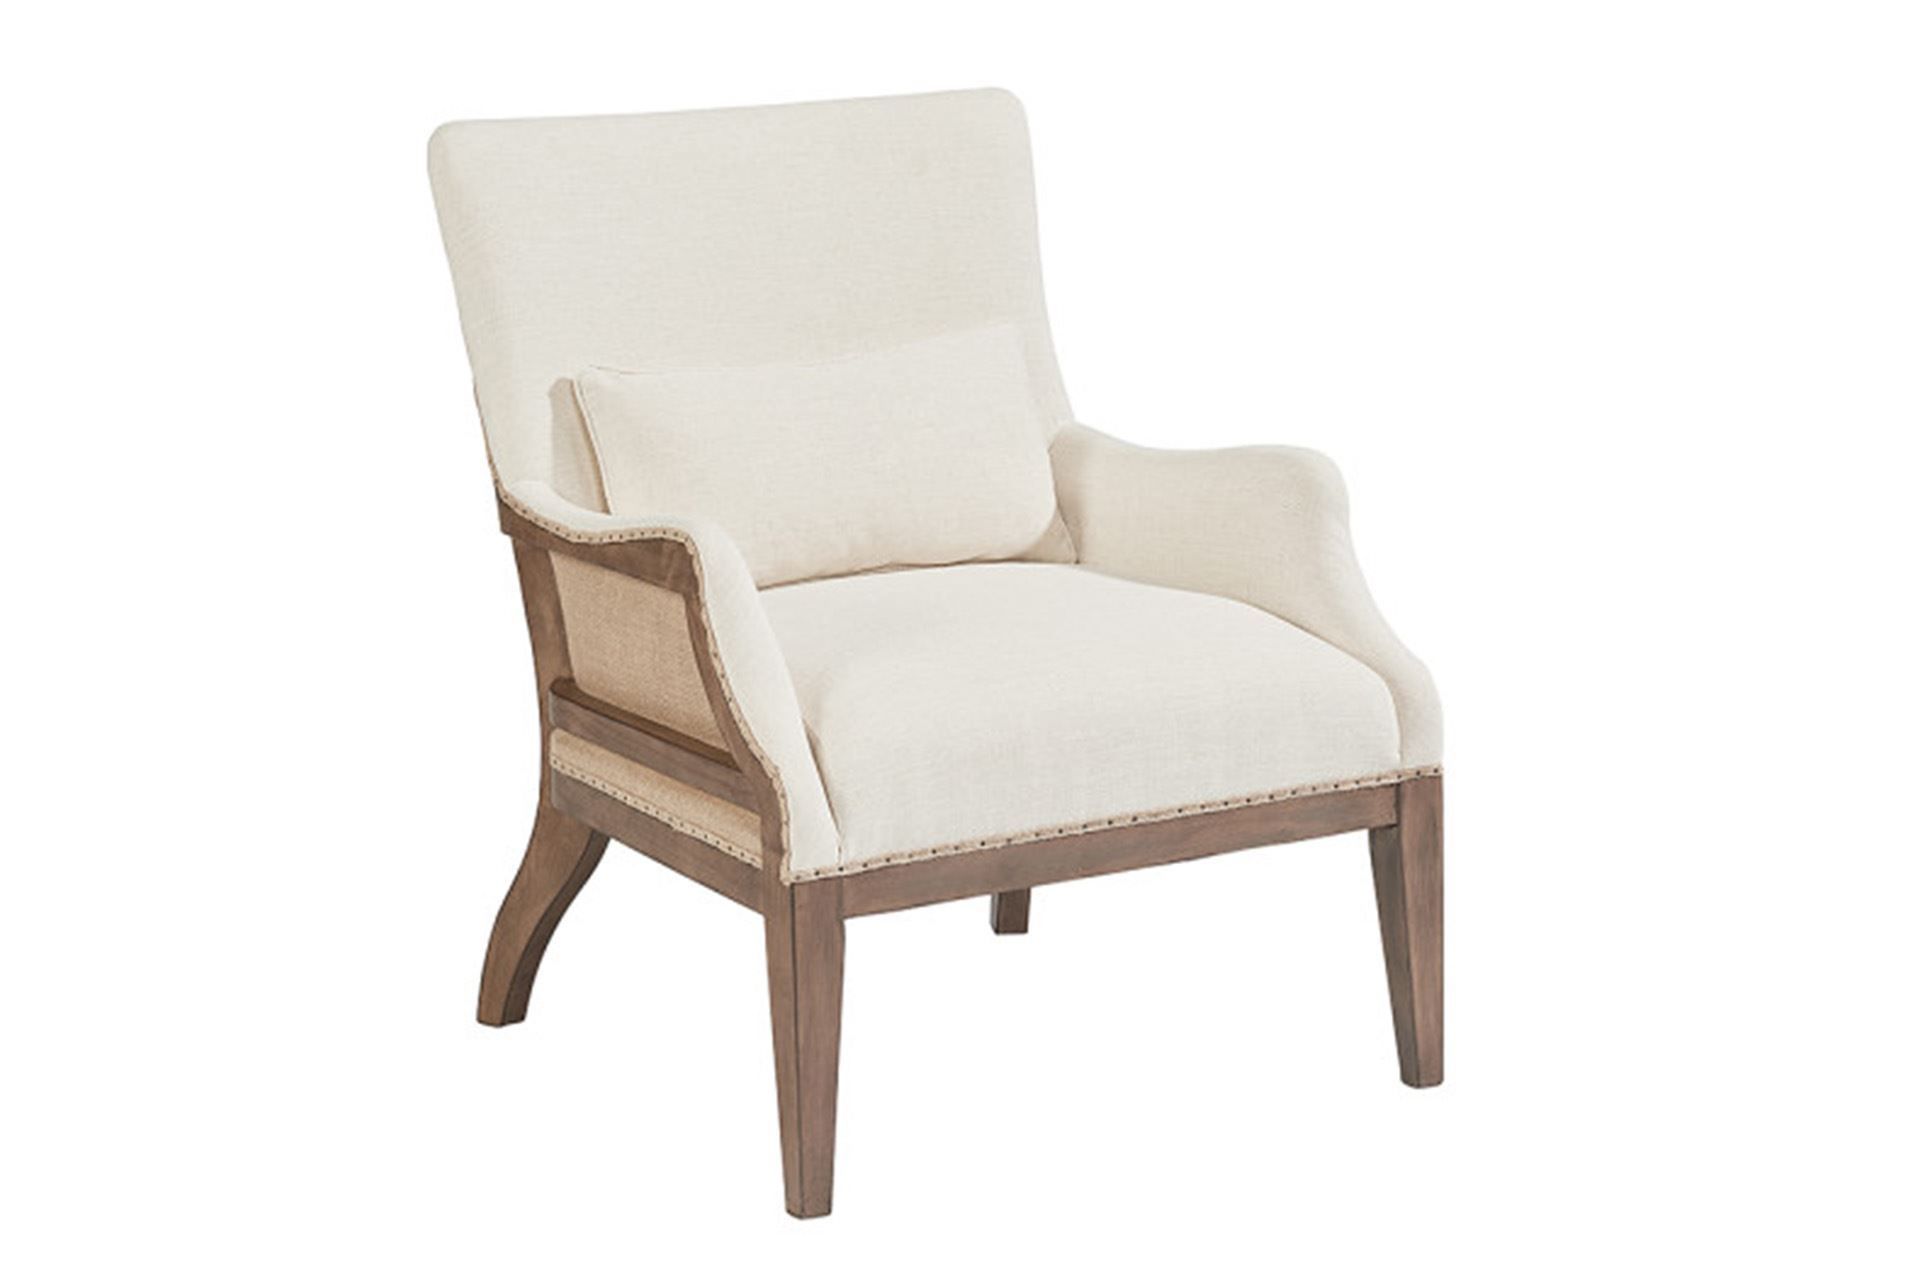 Renew Accent Chair Demonstrates A Less Is More Quality With Its Inside Magnolia Home Paradigm Sofa Chairs By Joanna Gaines (View 17 of 25)